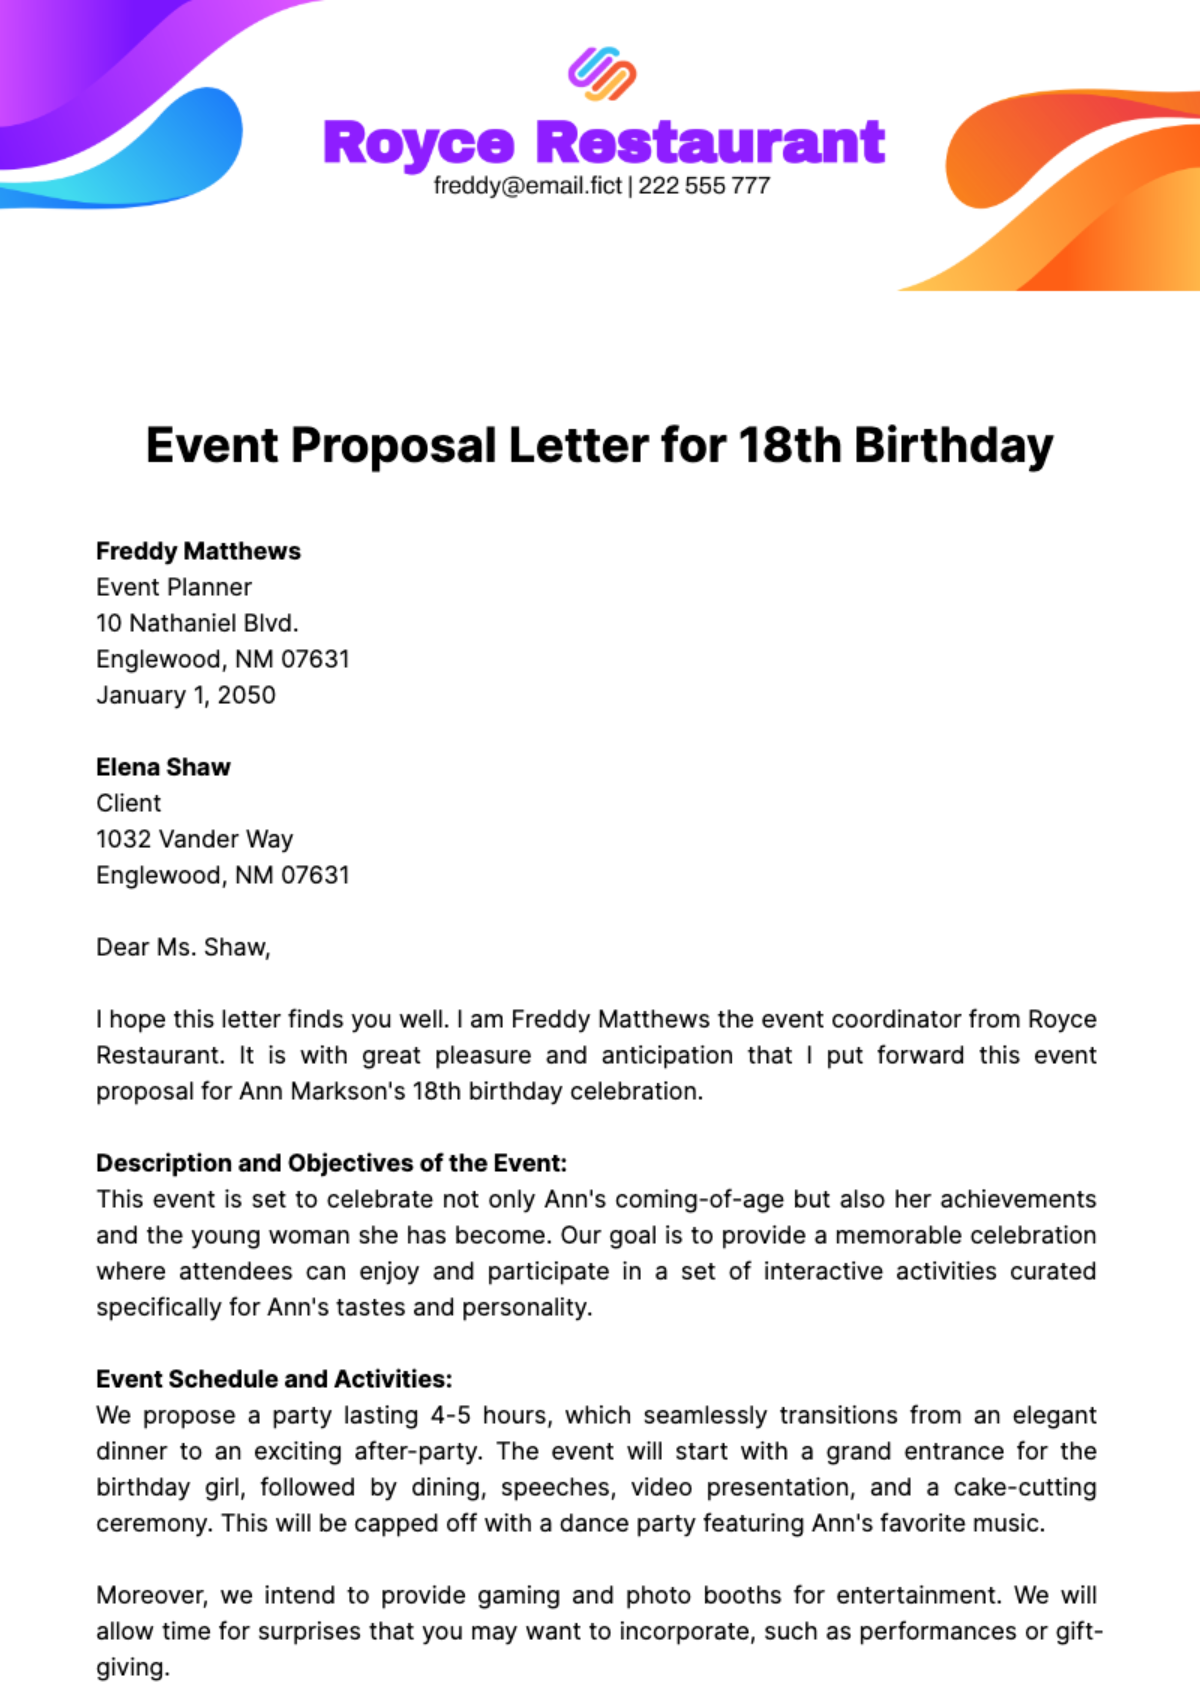 Free Event Proposal Letter for 18th Birthday Template